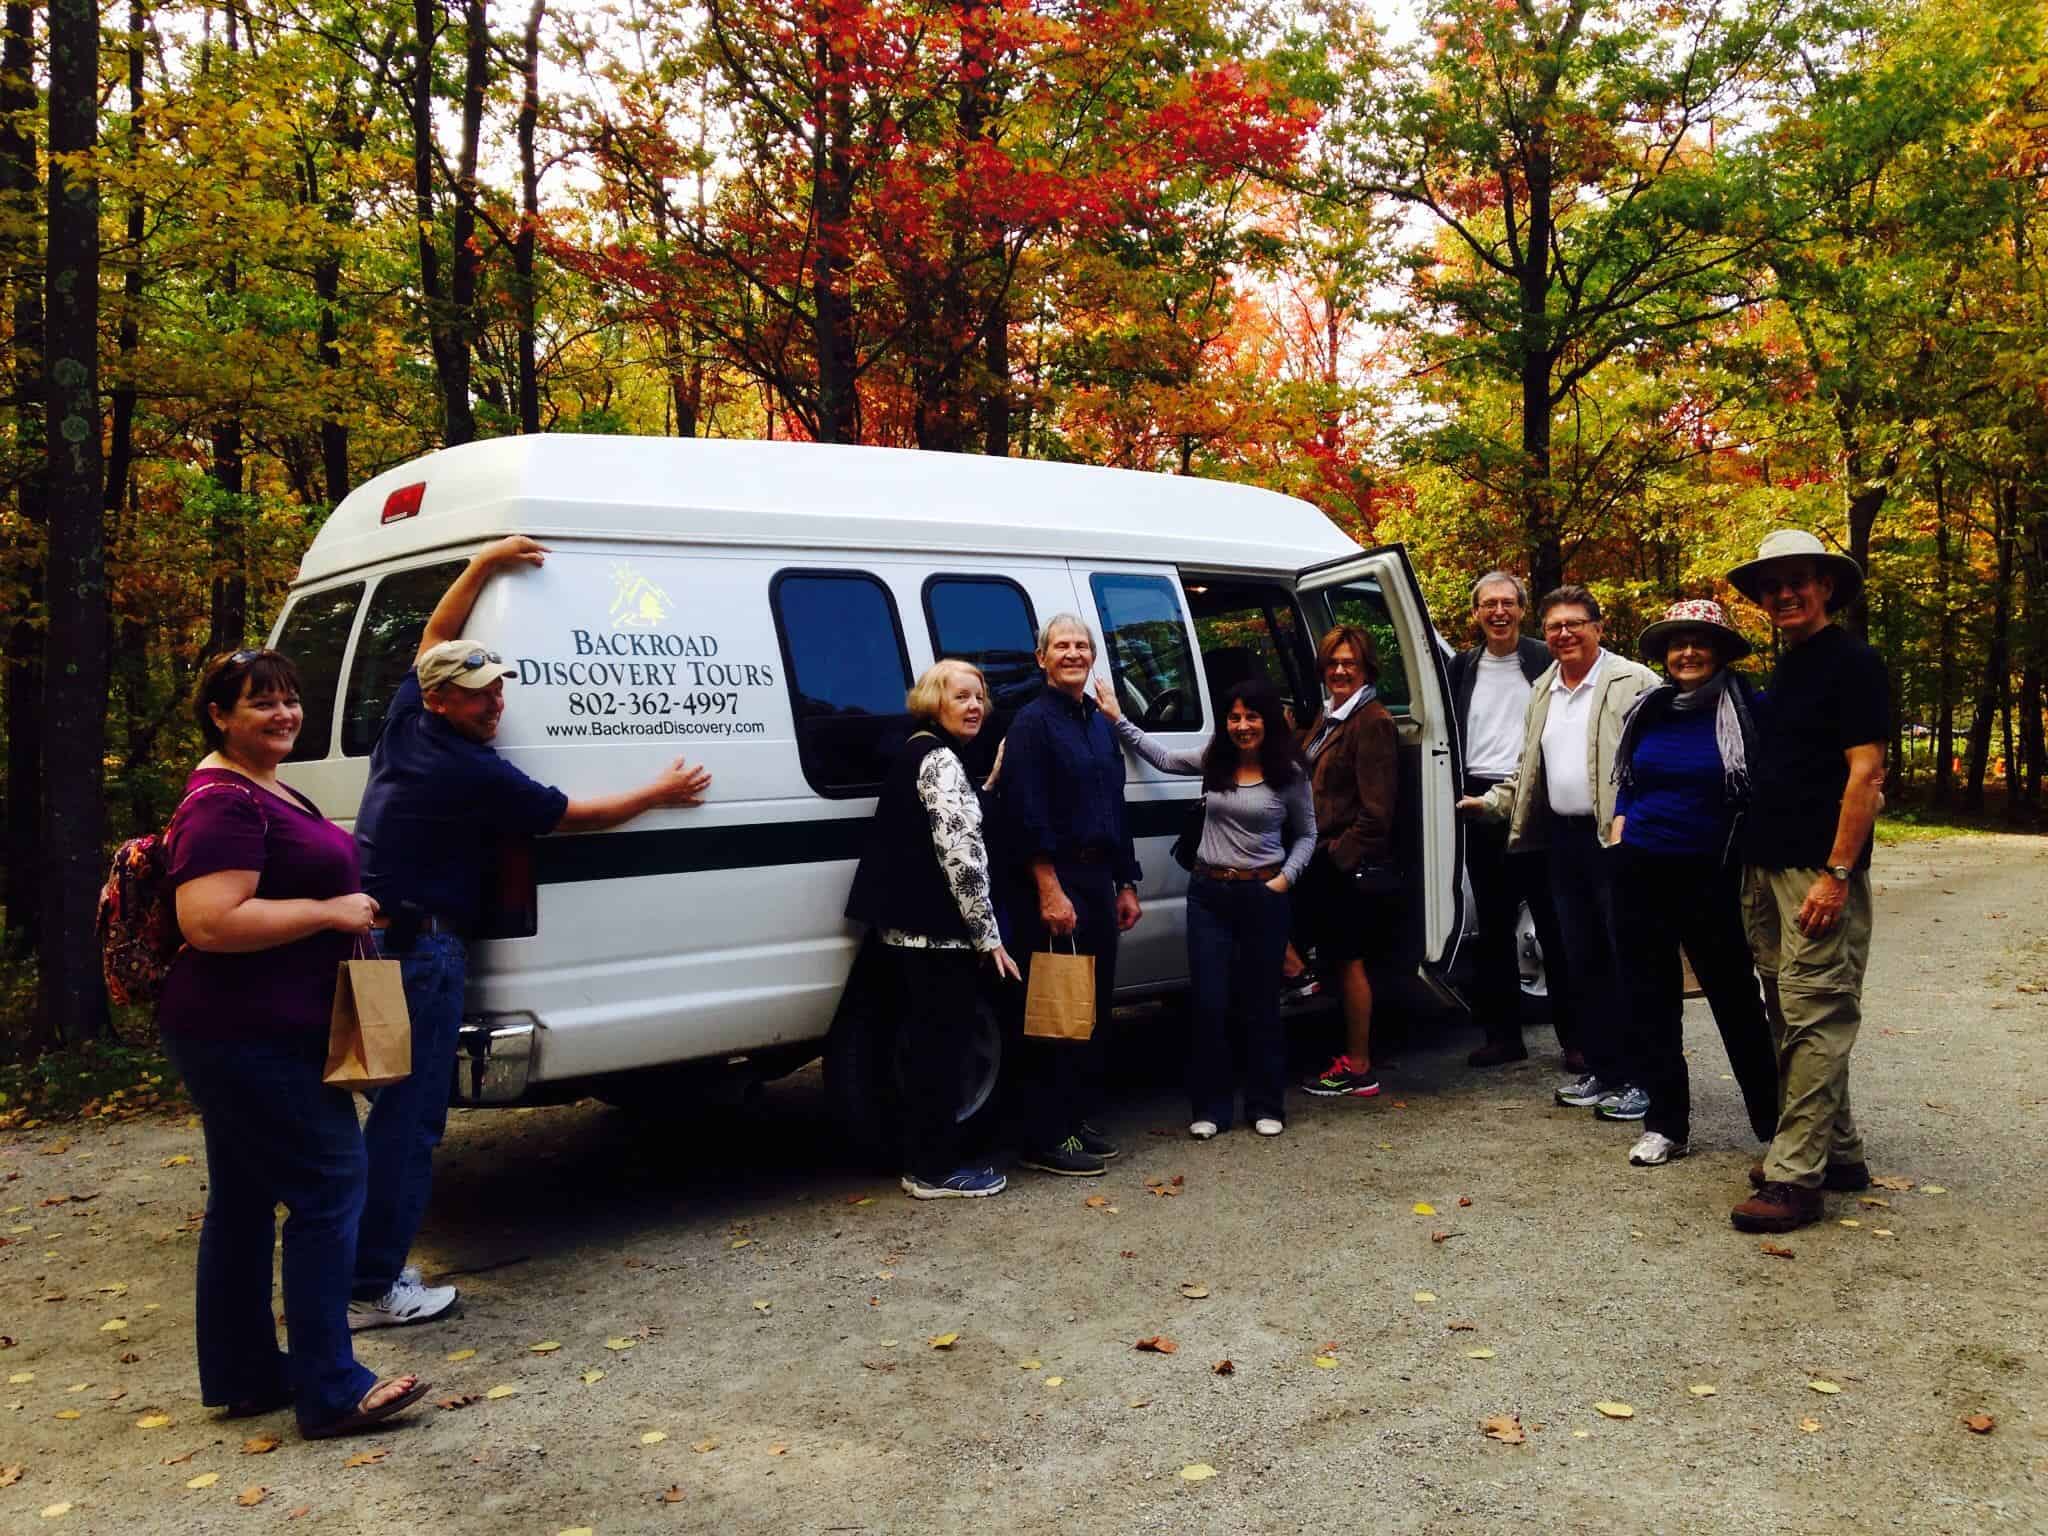 Backroad Discovery Tours - Group with Van during Foliage